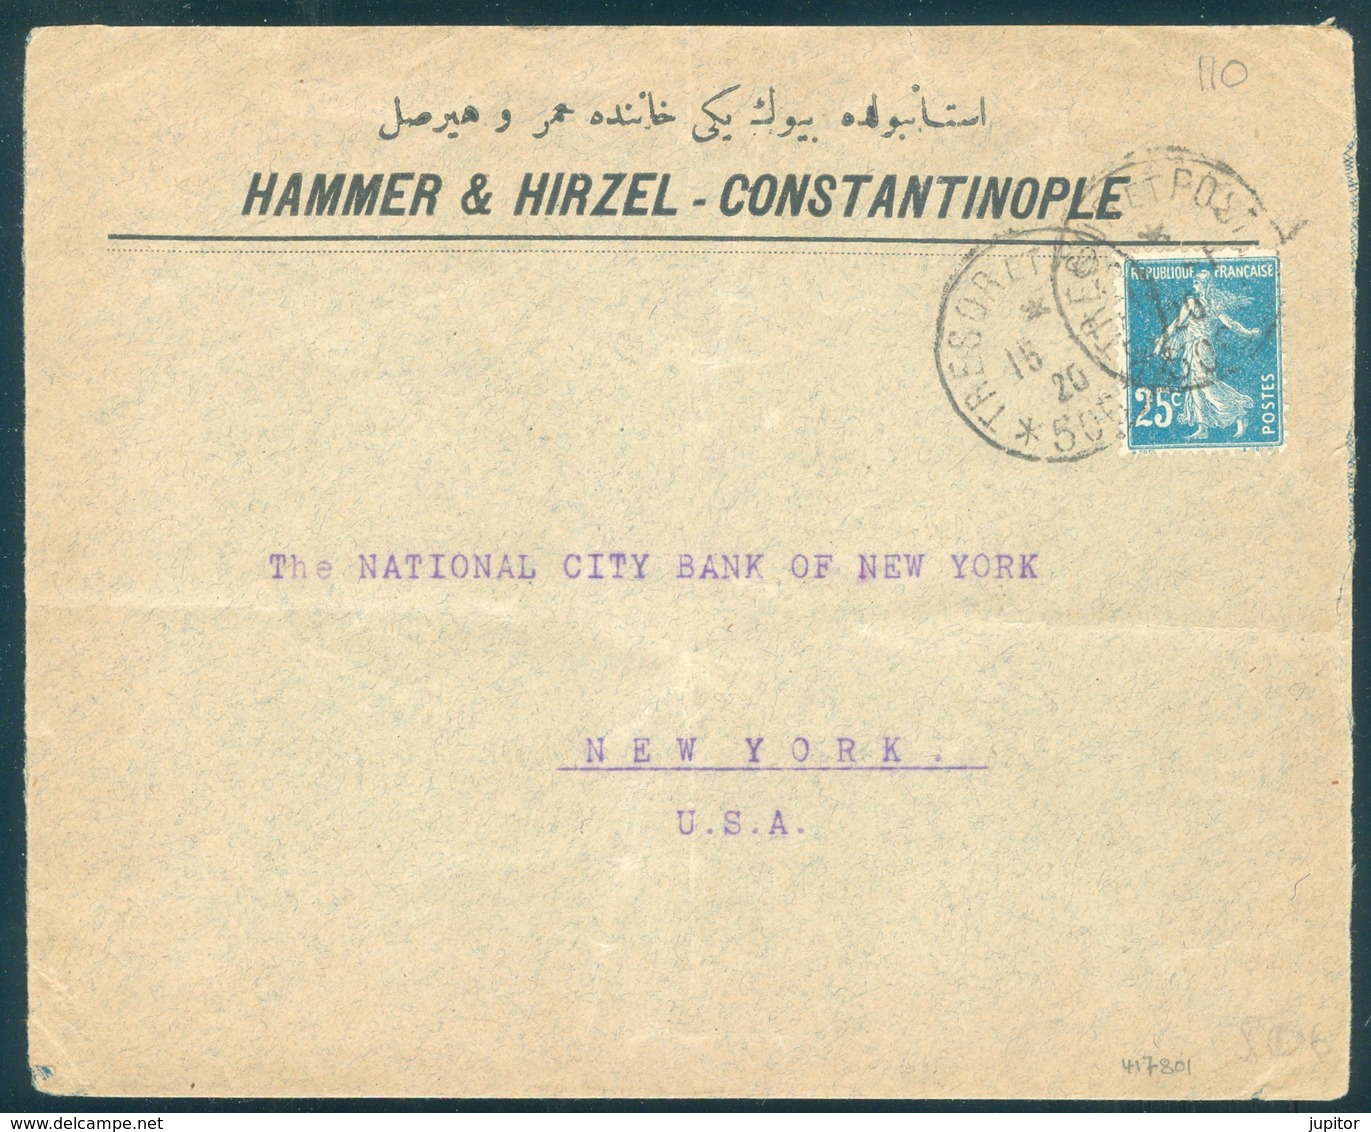 Turkey Constantinople Cover Hammer & Hirzel 1920 To New York Bank France Tresor Et Postes 506 - Covers & Documents